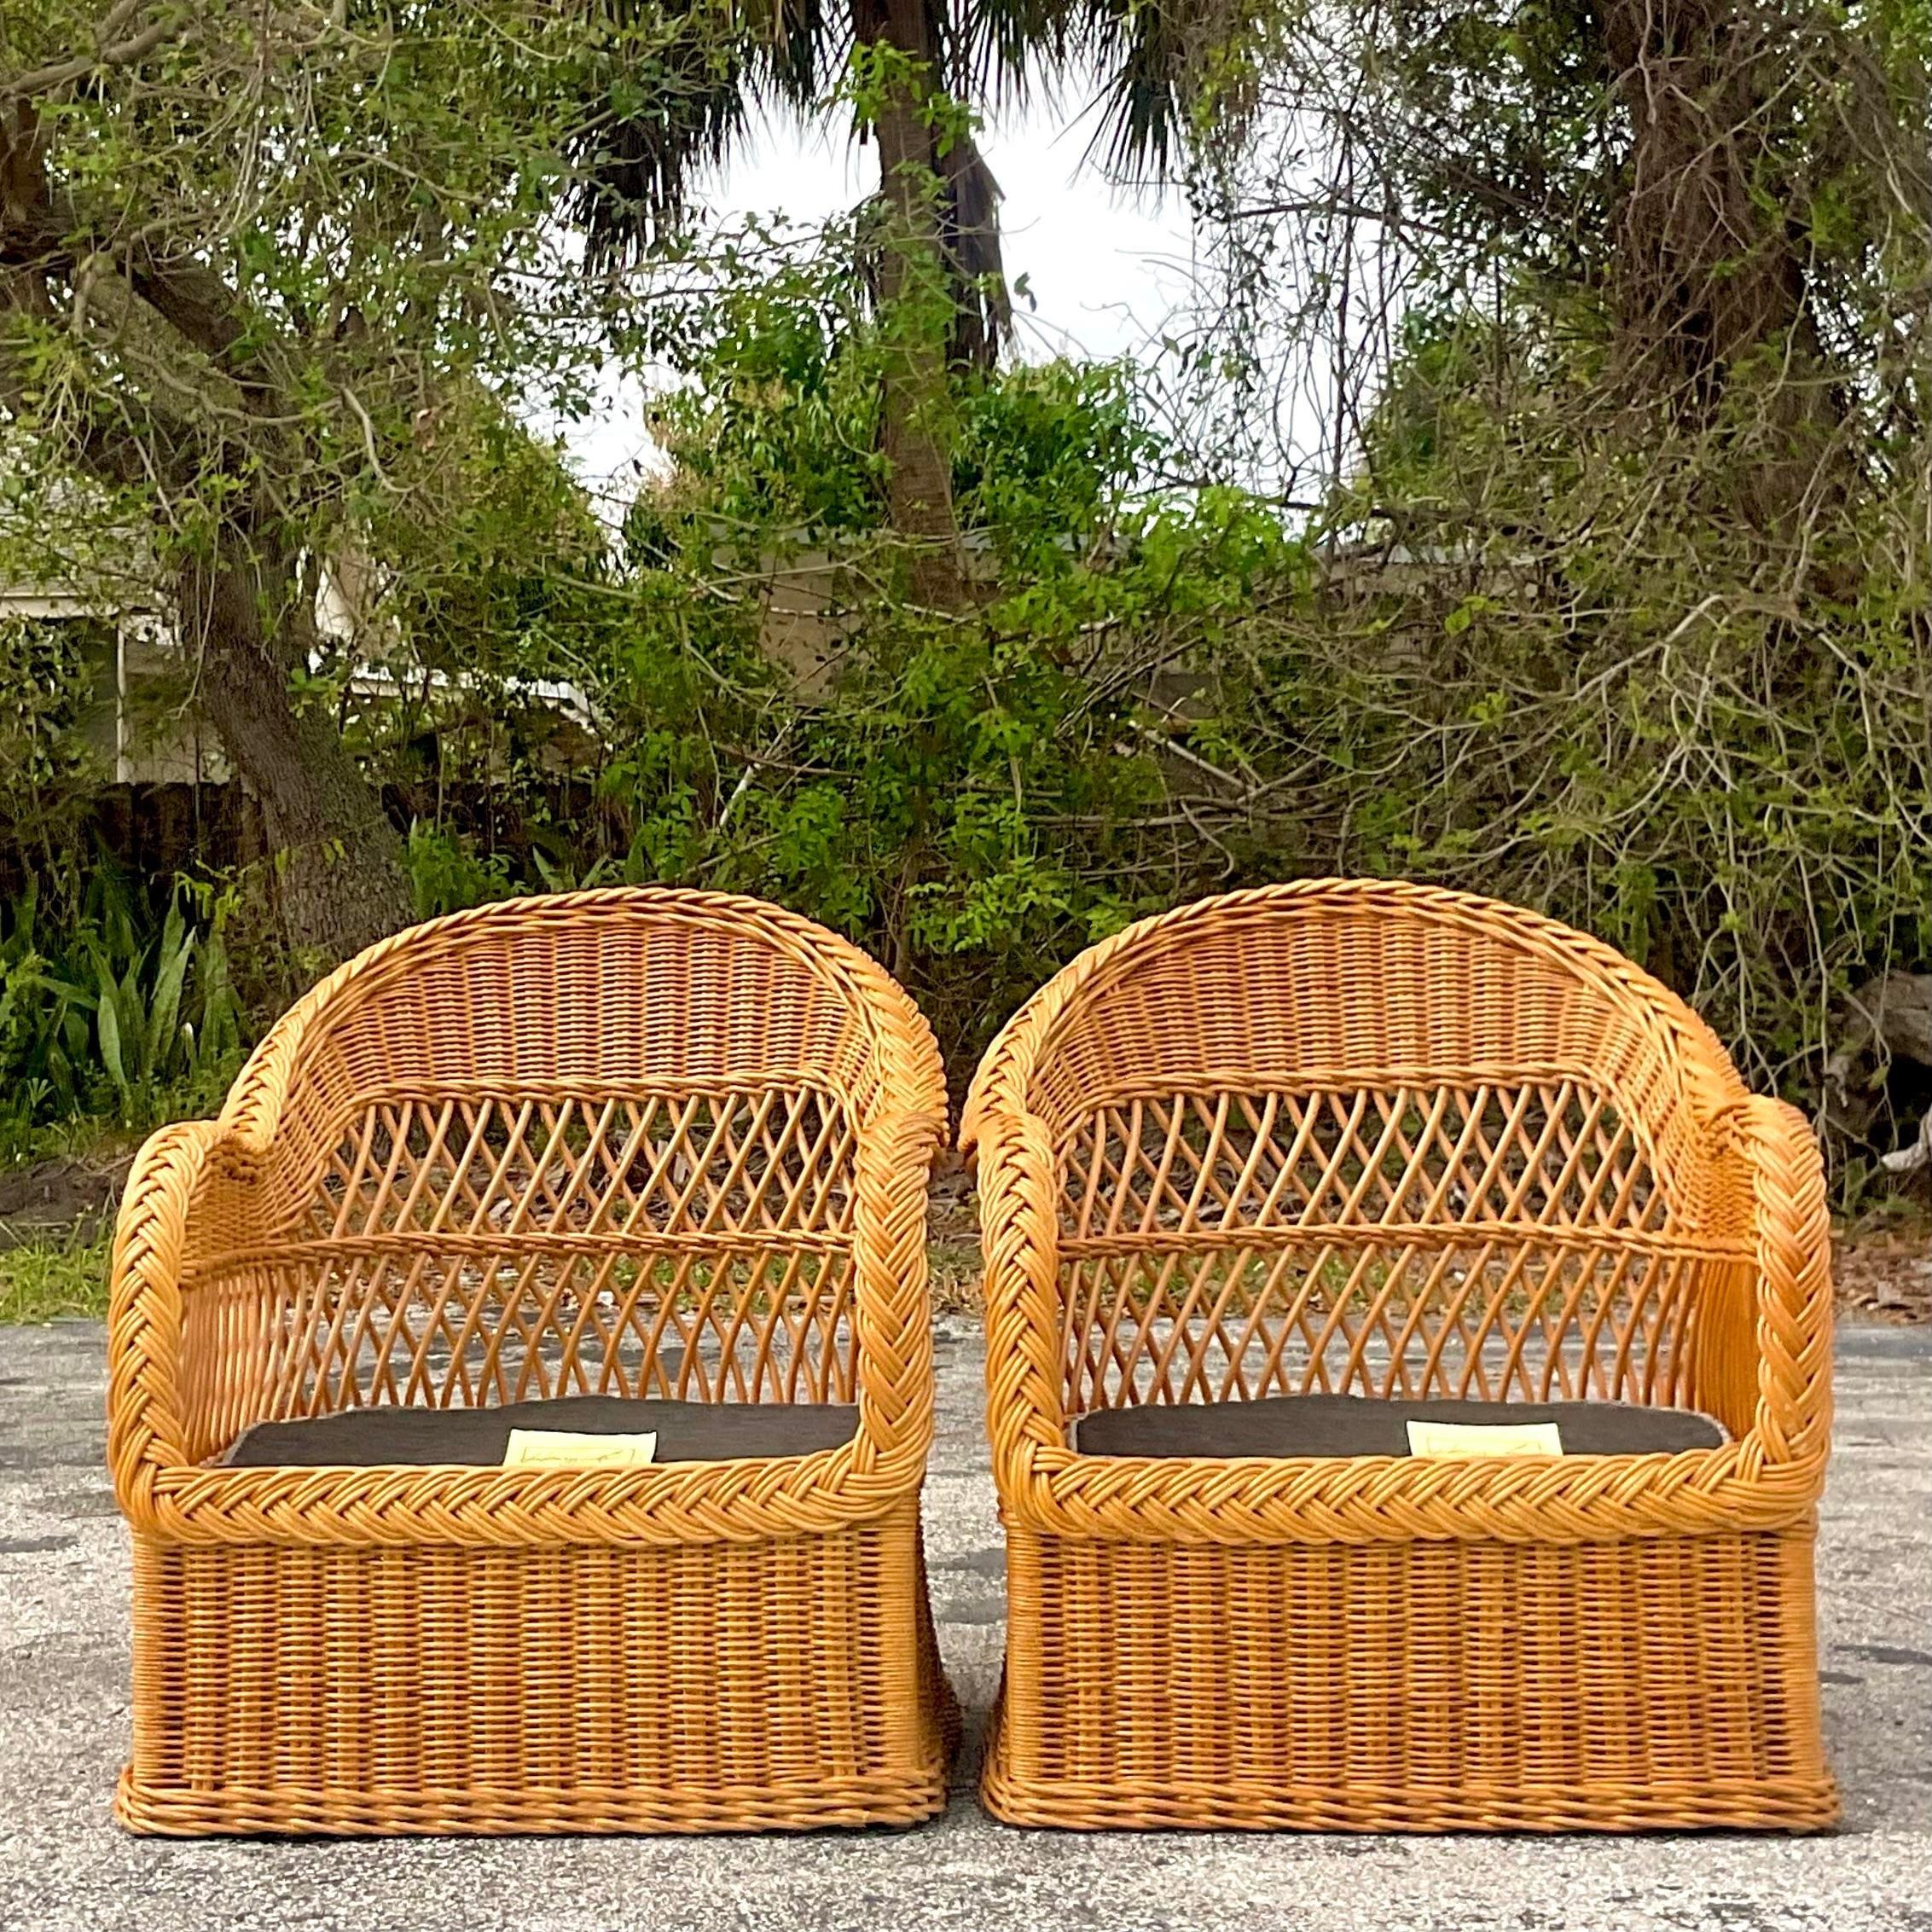 A fabulous pair of vintage Coastal lounge chairs. Made by the iconic Henry Link group and tagged on the seat. A chic braided rattan trim on a warm woven rattan acquired from a Palm Beach estate.